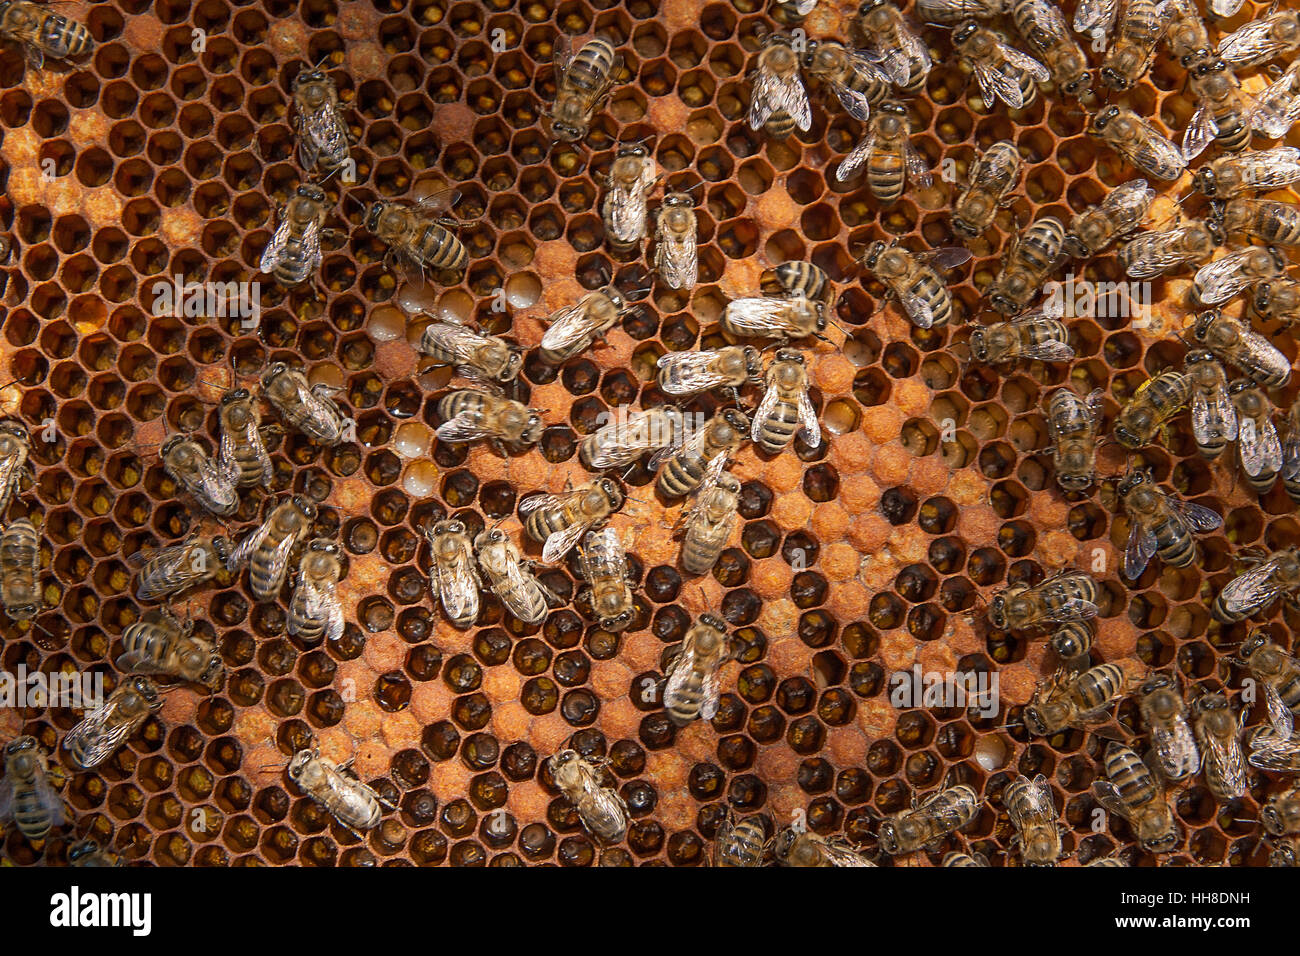 Busy bees inside hive with open and sealed cells for their young. Birth of o a young bees. Close up showing some animals and honeycomb structure. Stock Photo